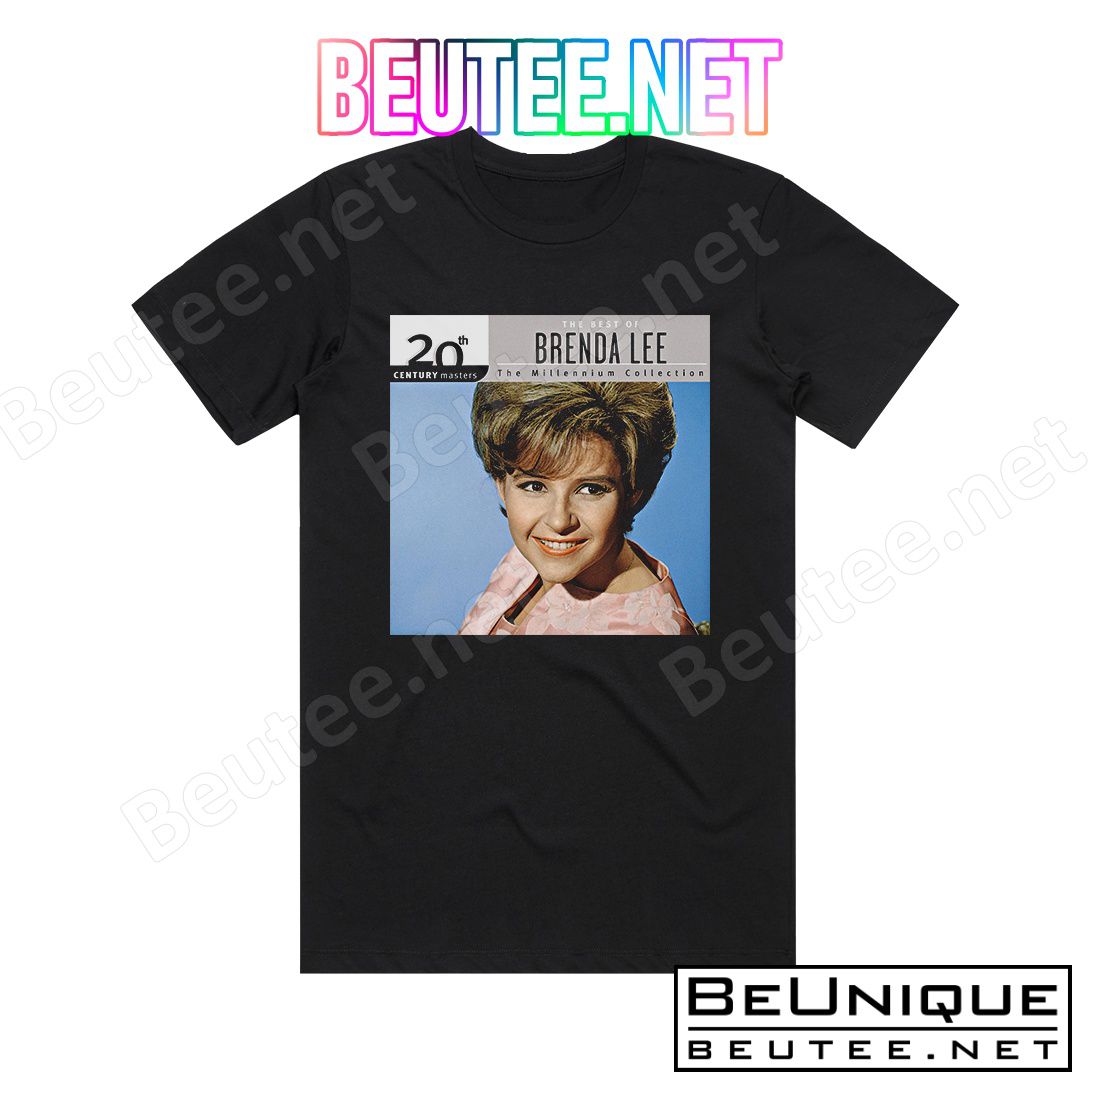 Brenda Lee 20Th Century Masters The Millennium Collection The Best Of B Album Cover T-Shirt